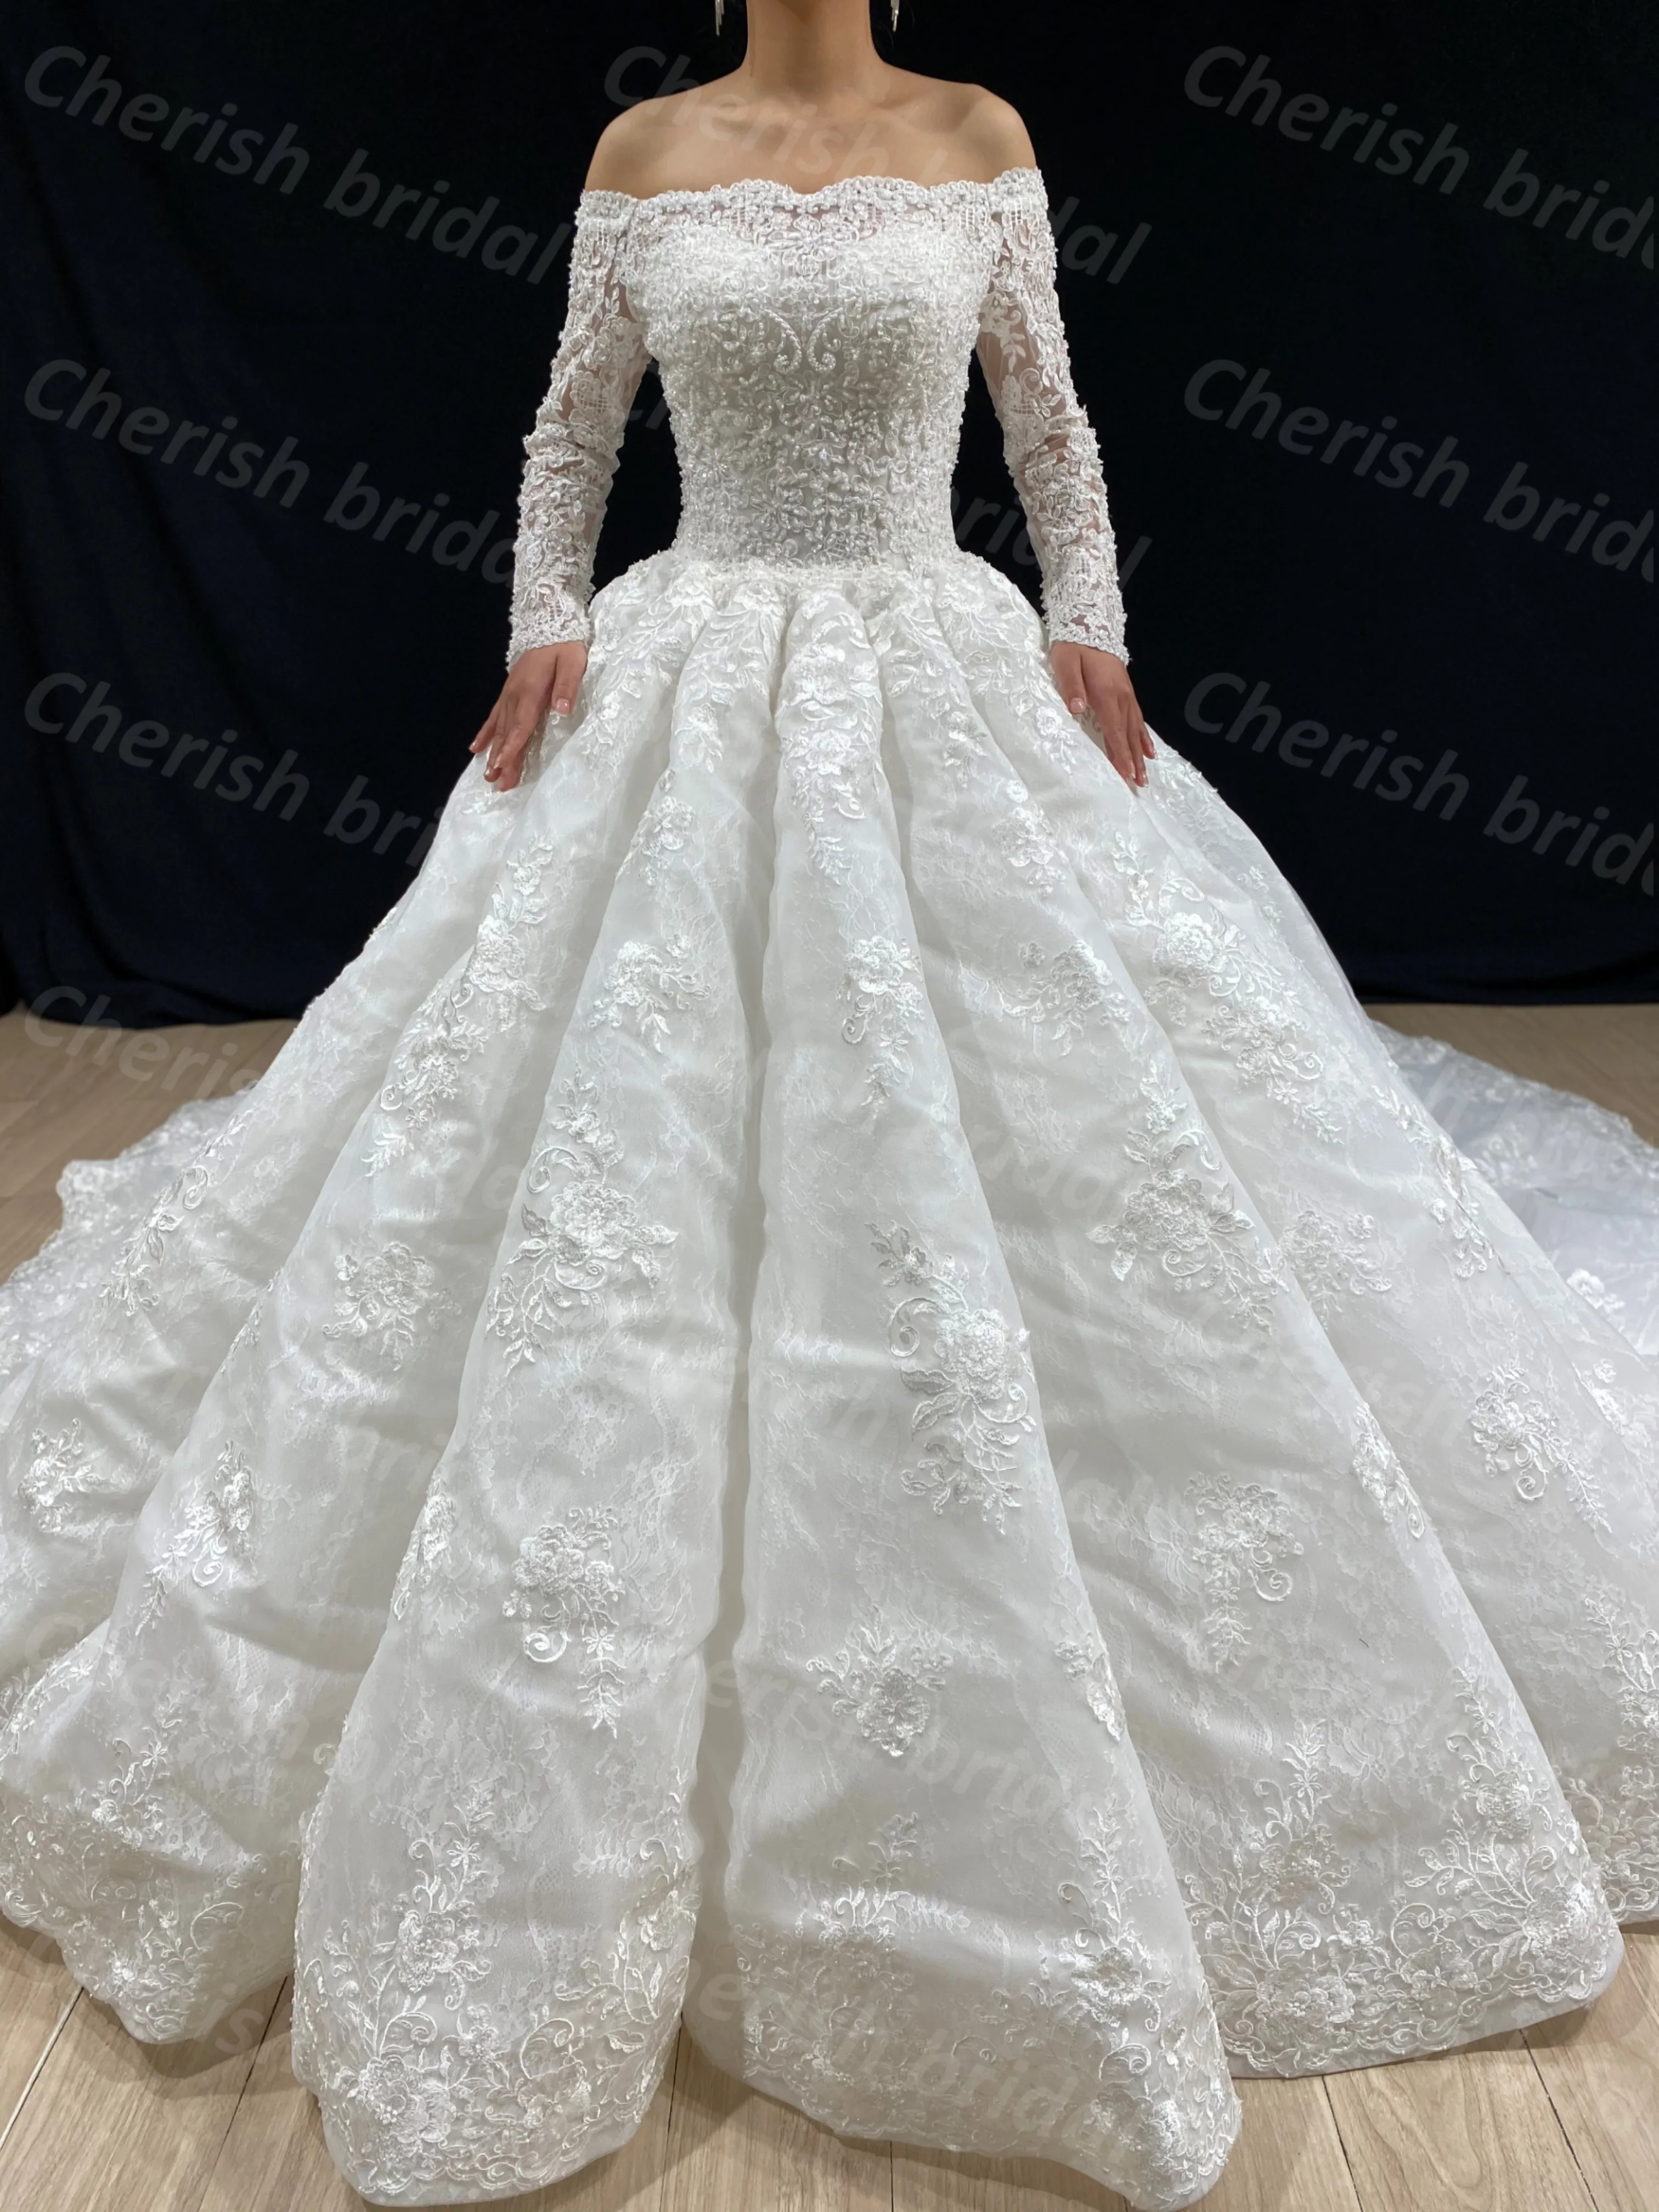 

C1054B Ivory Wedding Dresses for Woman Off Shoulder Ball Gown Bride Dress Long Sleeve Lace Applique and Beading Bridal Dress